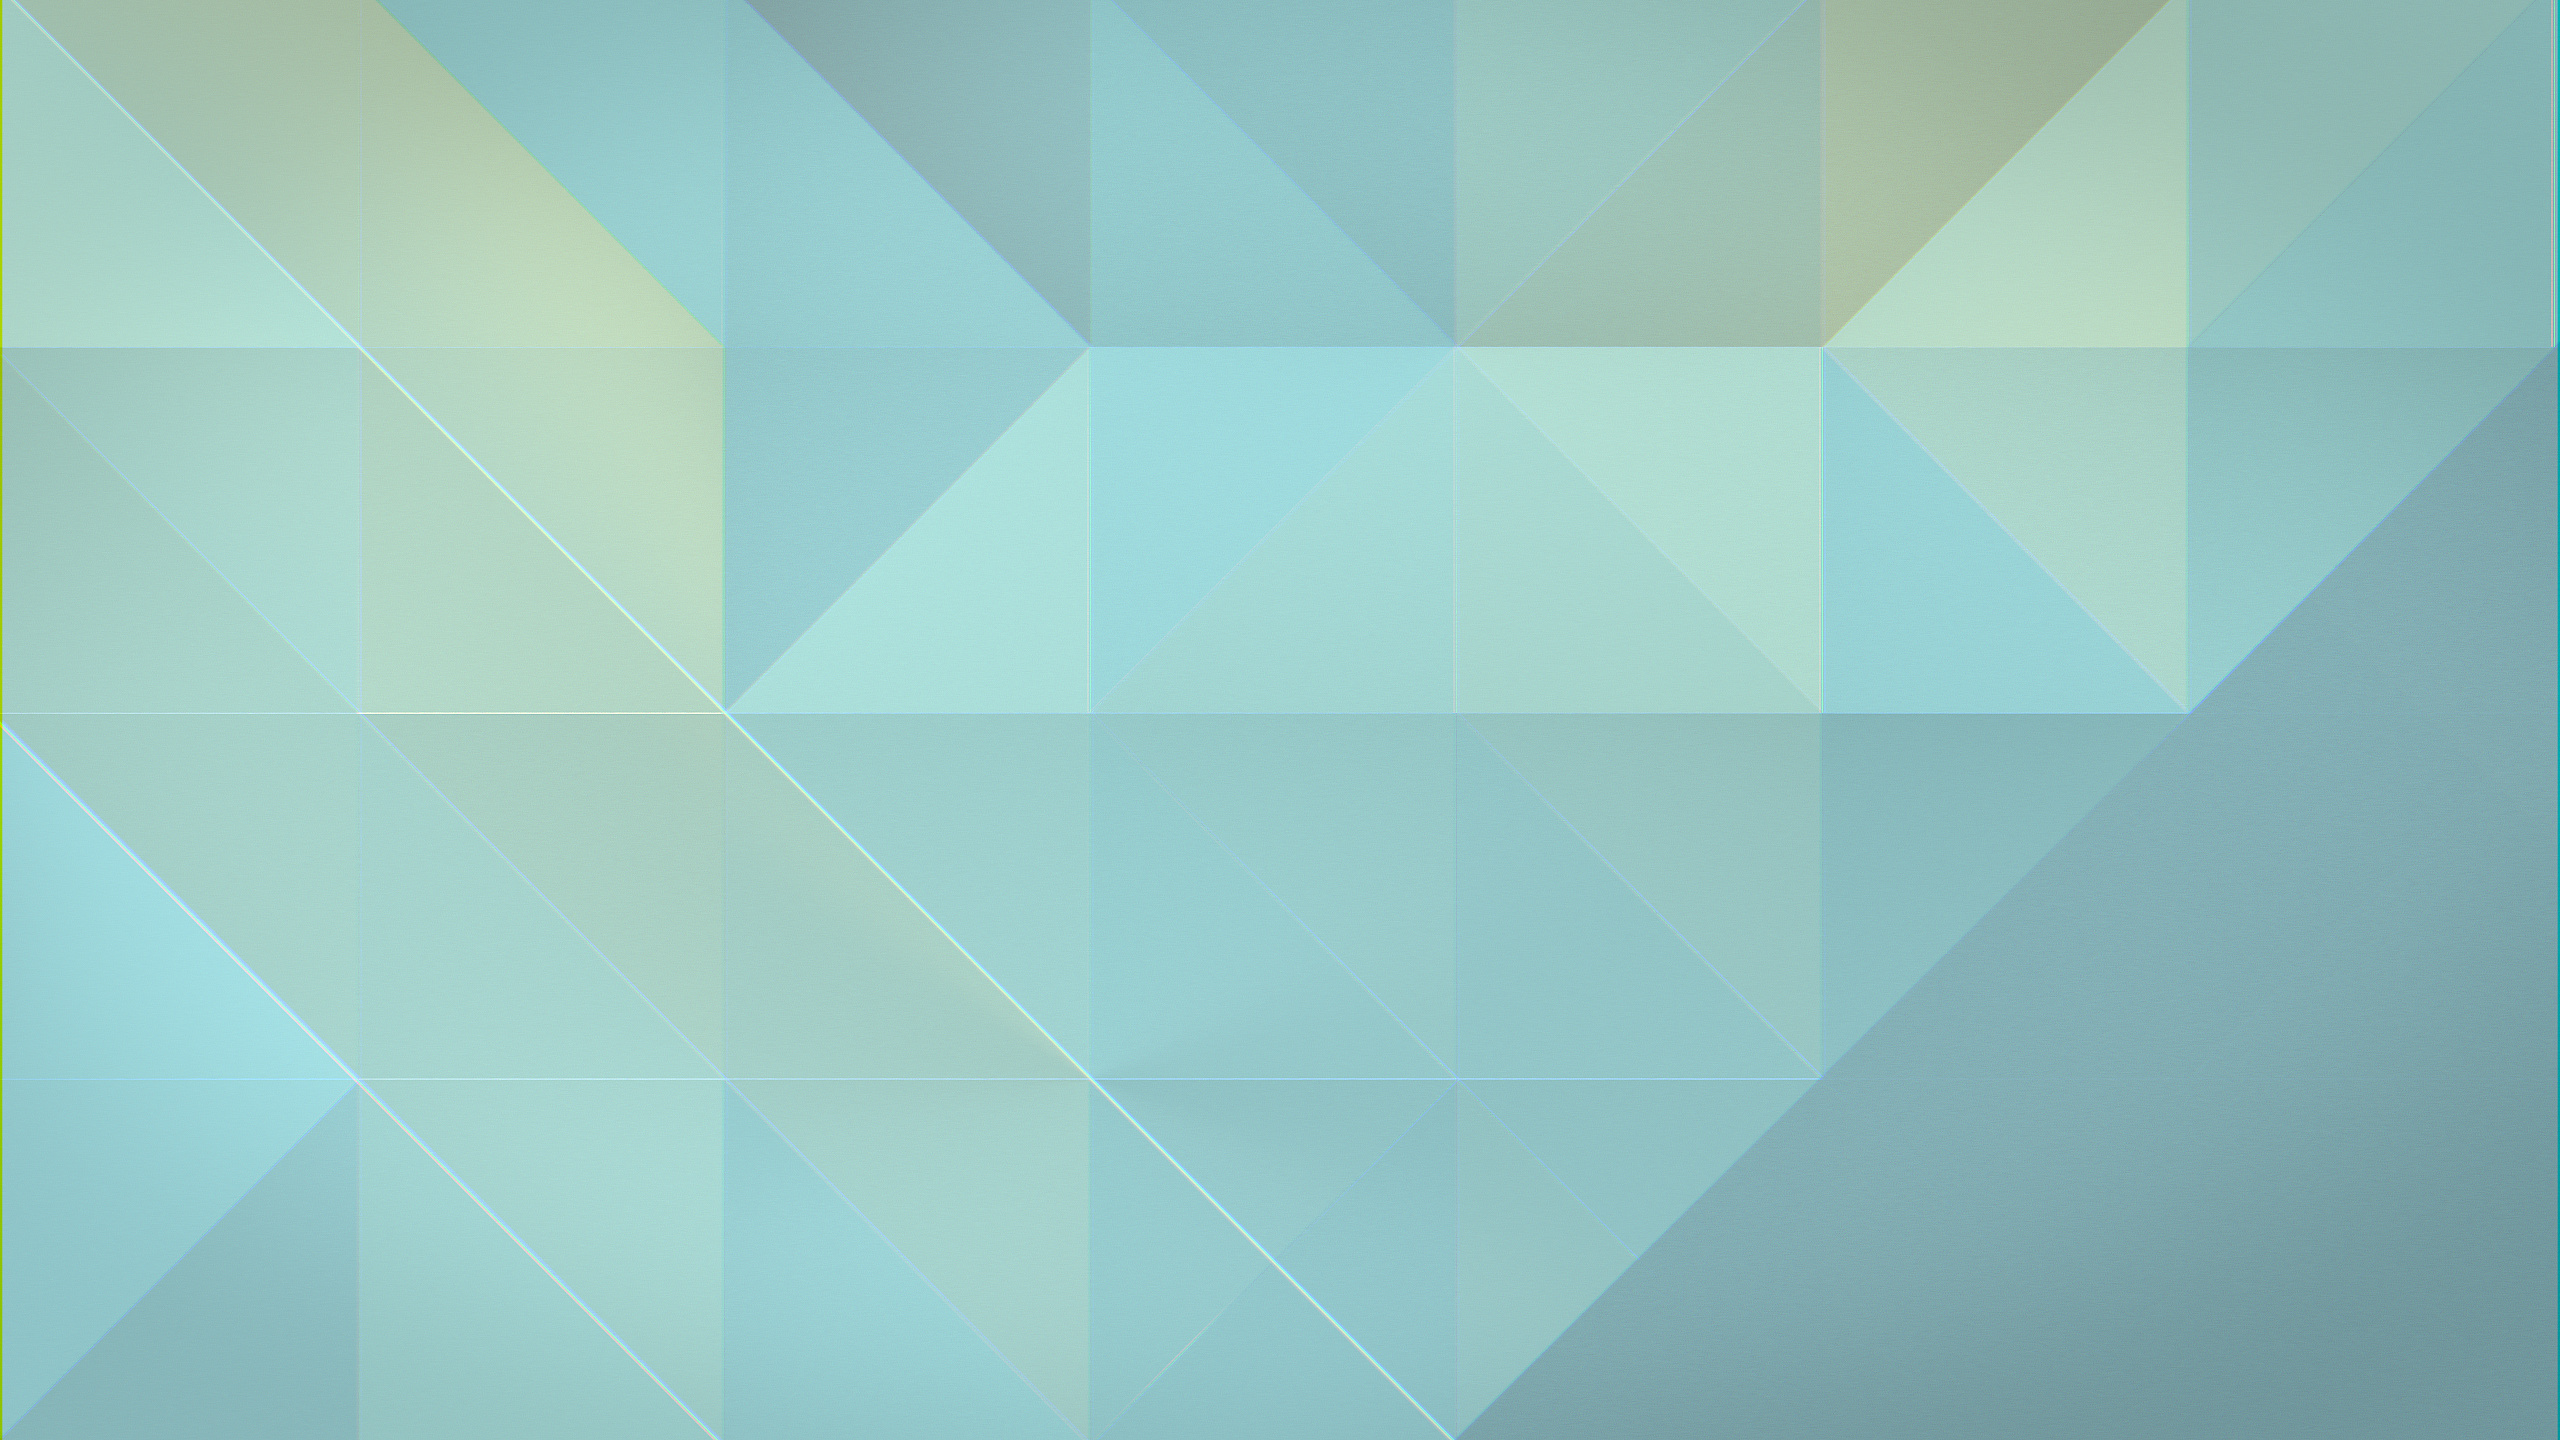 This Is the Default Wallpaper of the GNOME 3.20 Desktop Environment